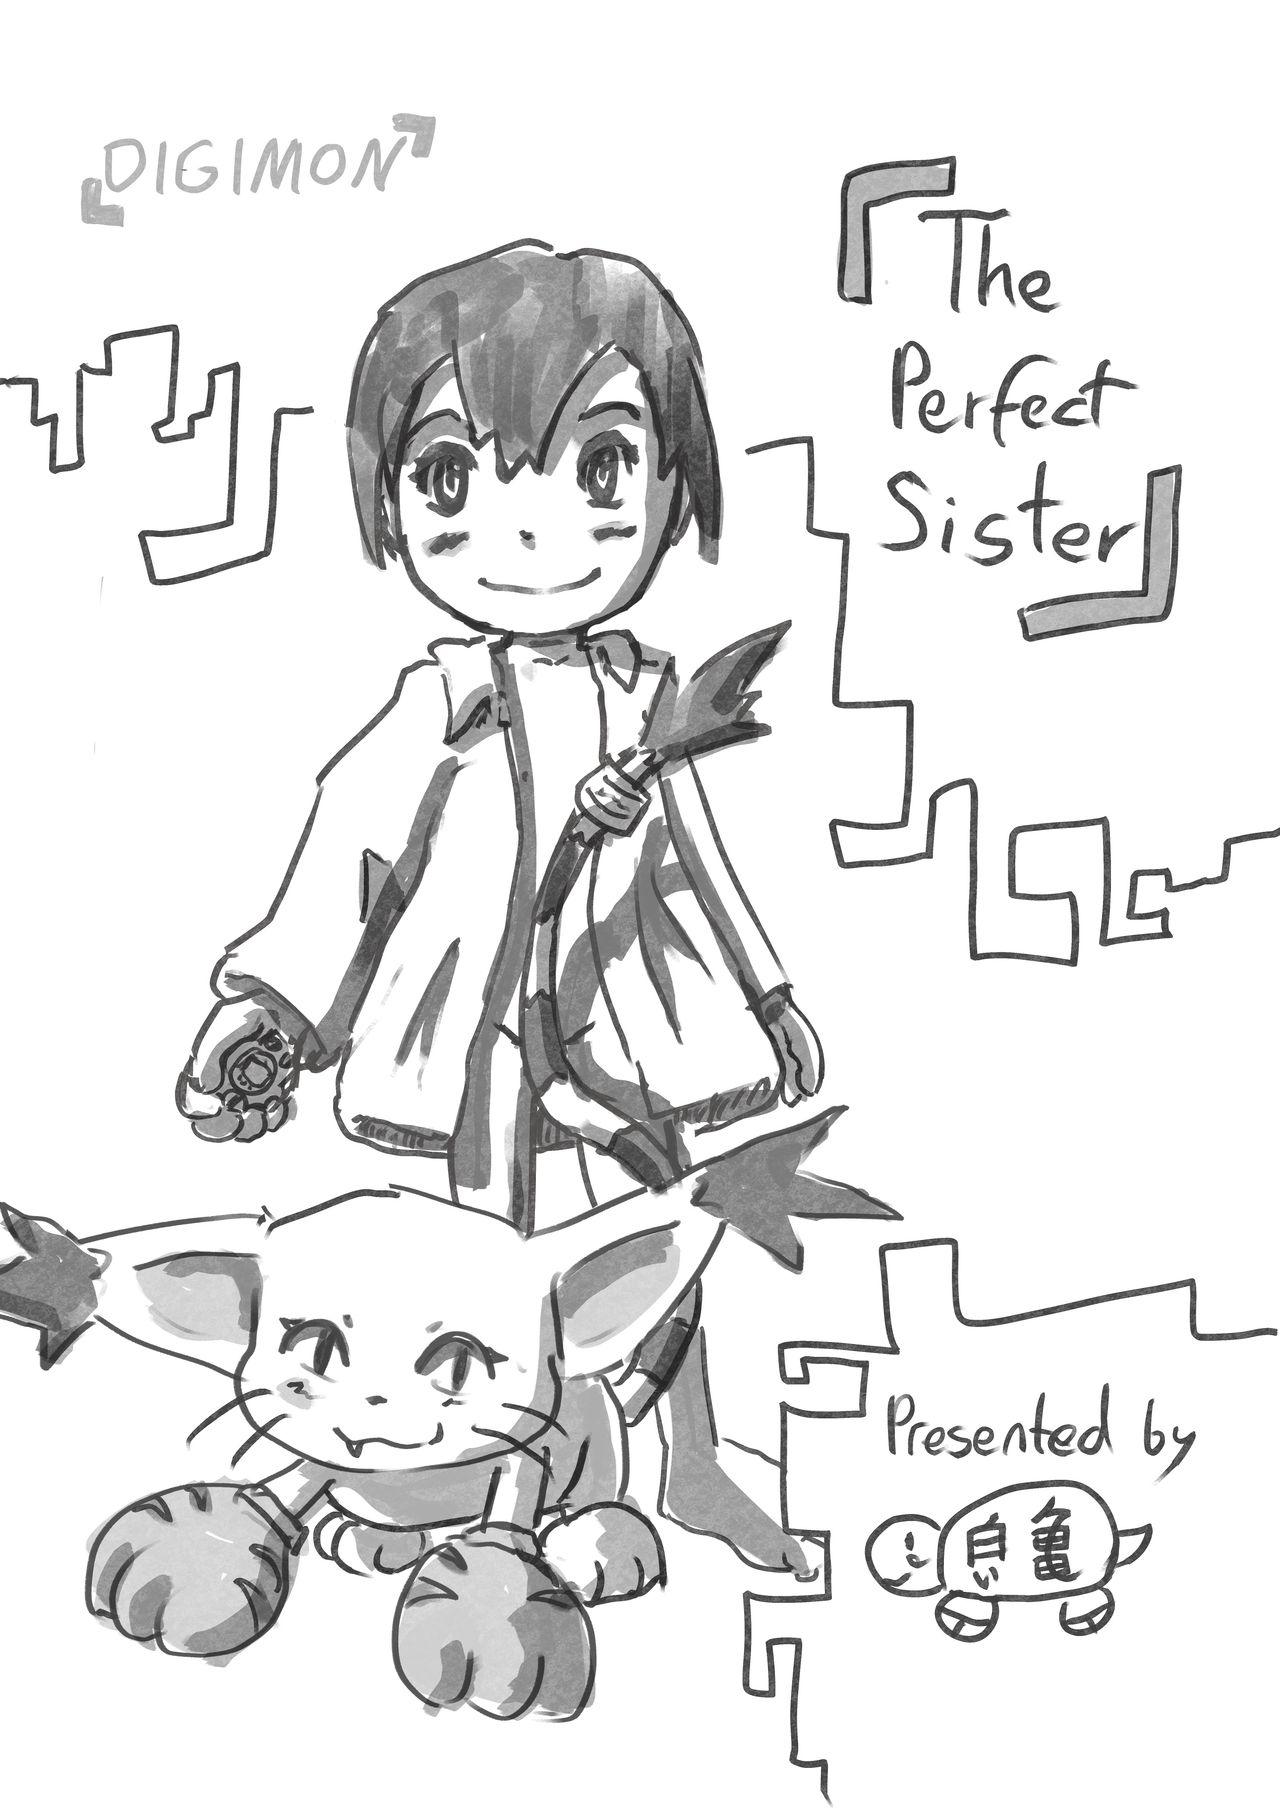 The perfect Sister 1